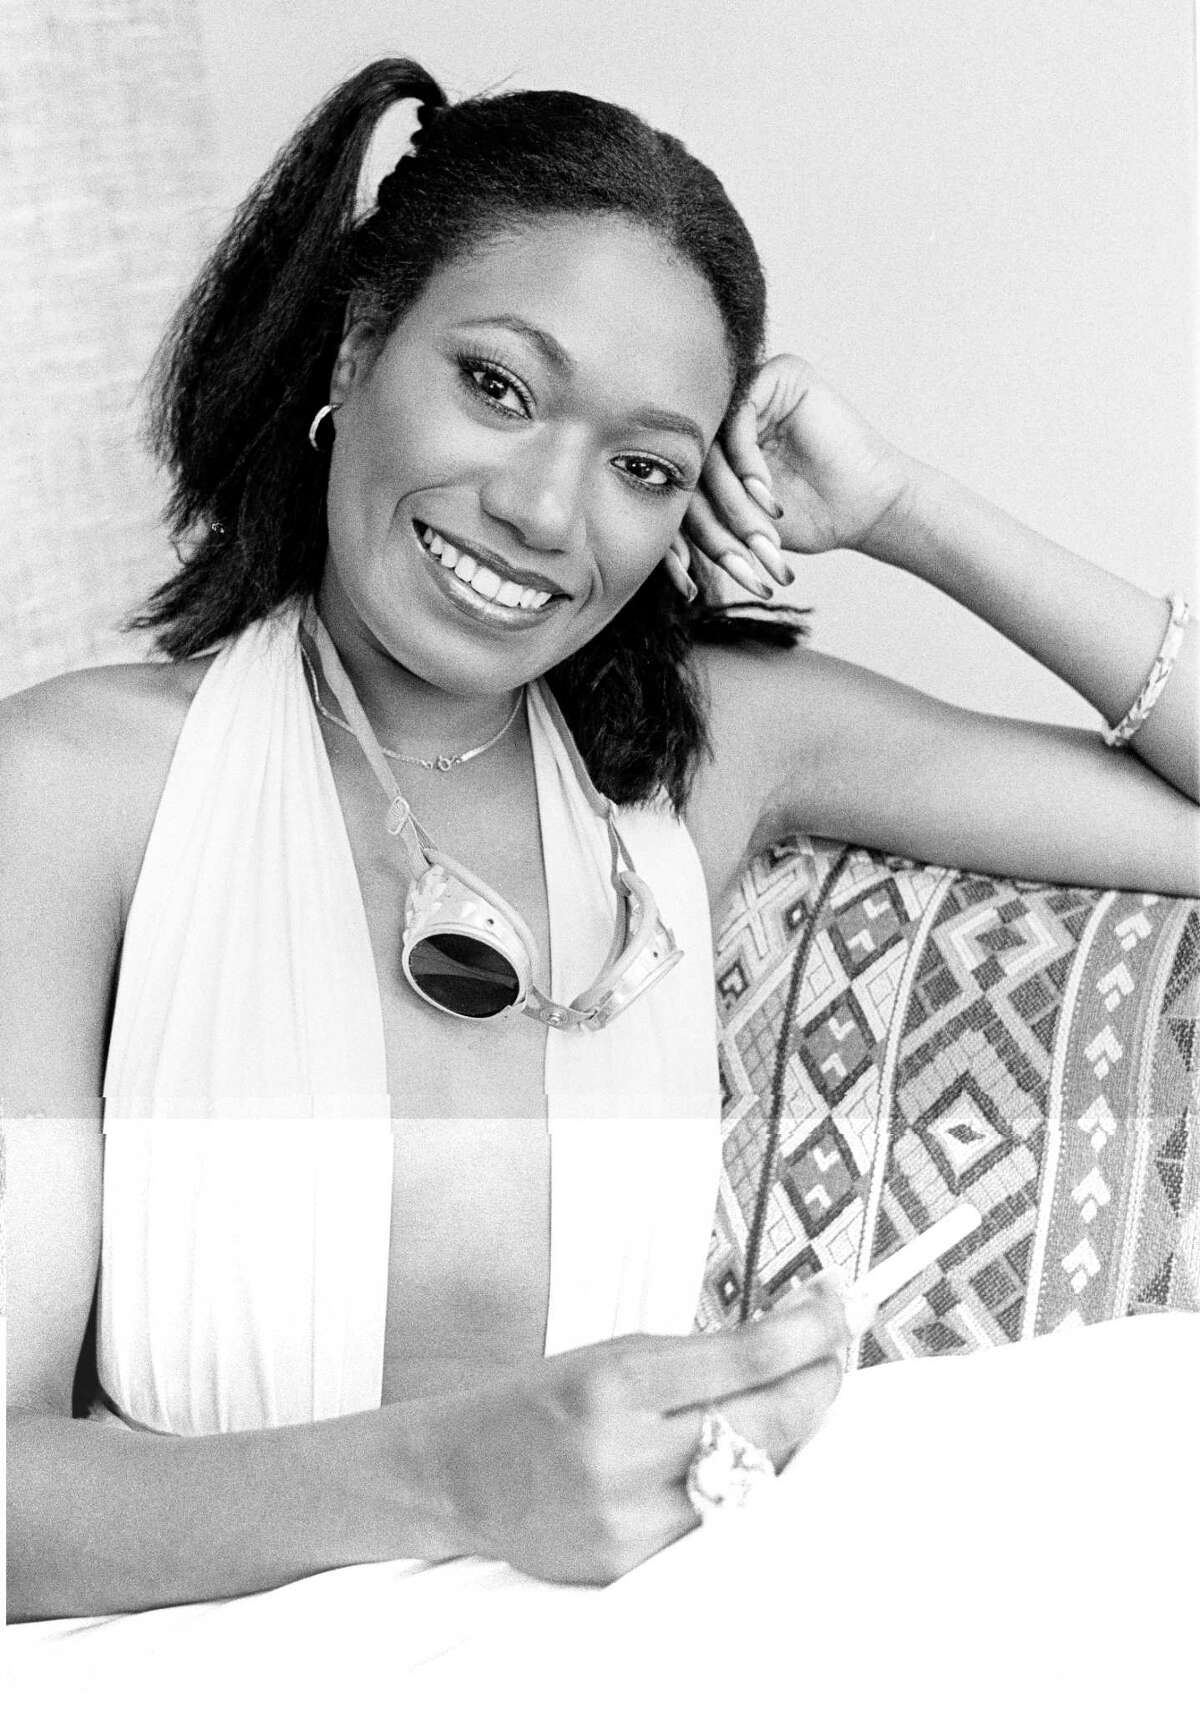 FILE - In this Sept. 4, 1979 file photo, Bonnie Pointer poses for a portrait in Los Angeles. Pointer, founding member of the Pointer Sisters, has died. Publicist Roger Neal says Pointer died of cardiac arrest in Los Angeles on Monday. She was 69. (AP Photo/George Brich, FIle)